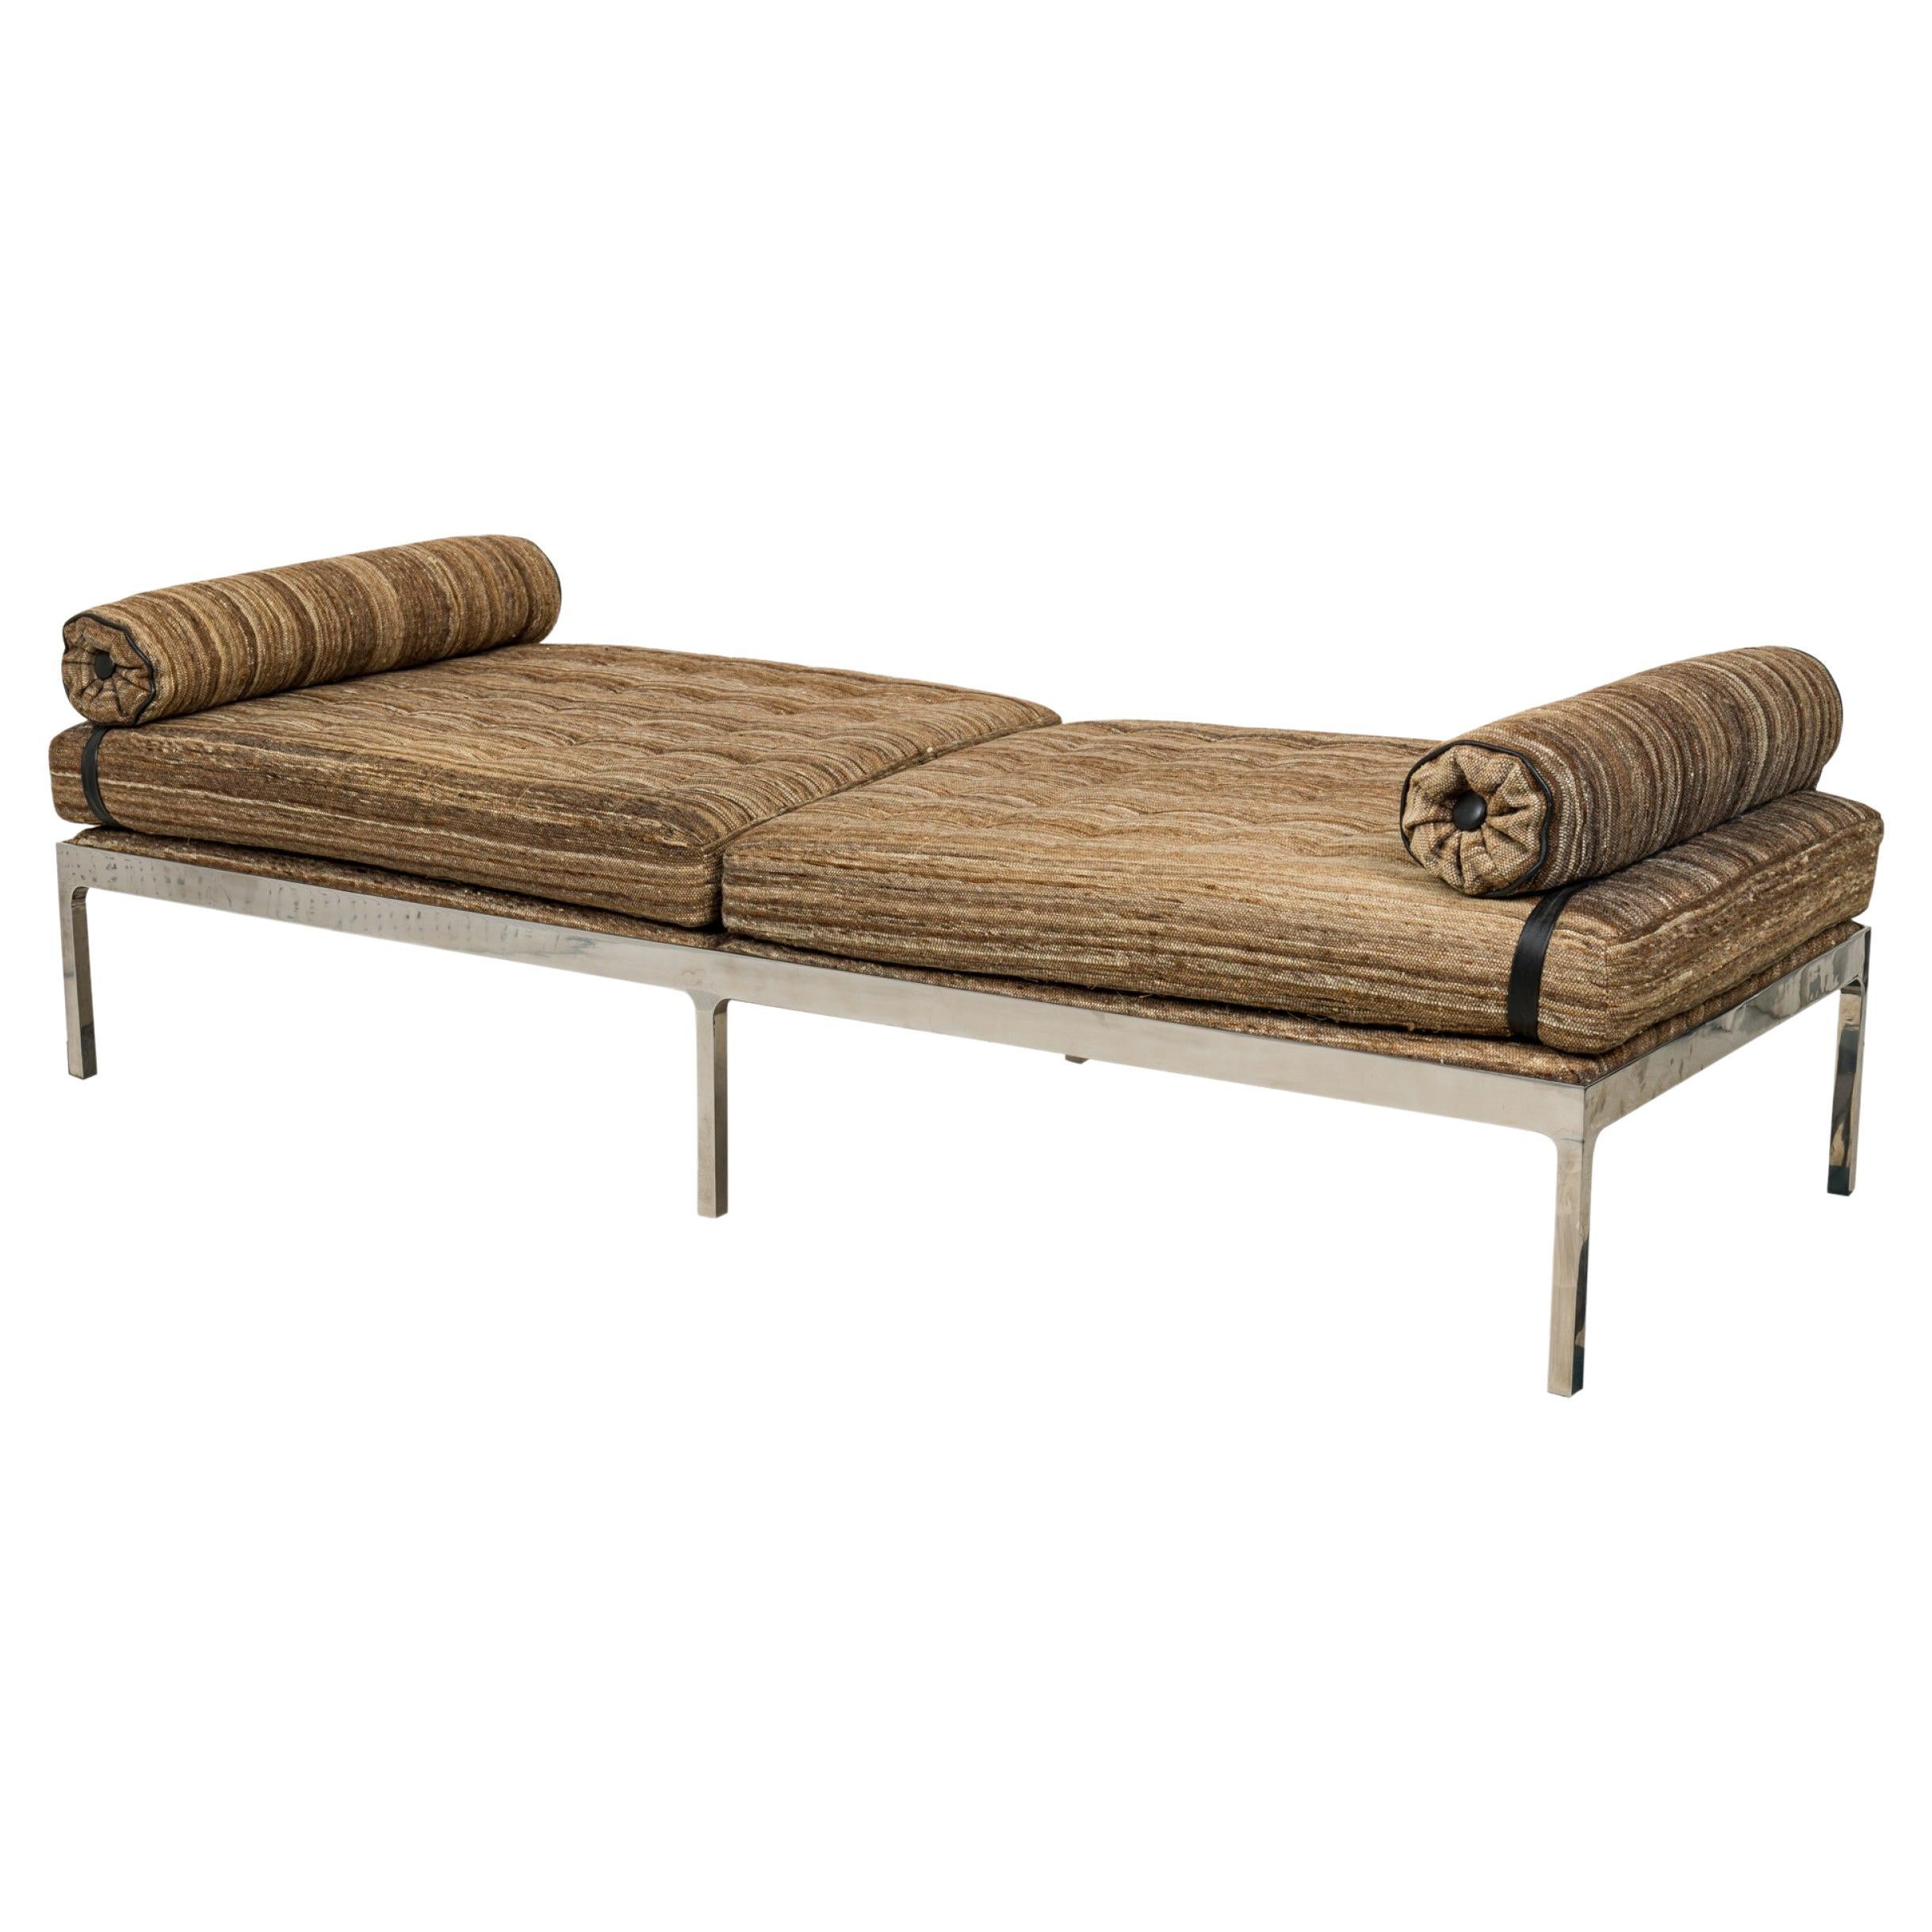 Brueton Brown and Beige Striped Upholstery and Chrome Daybed